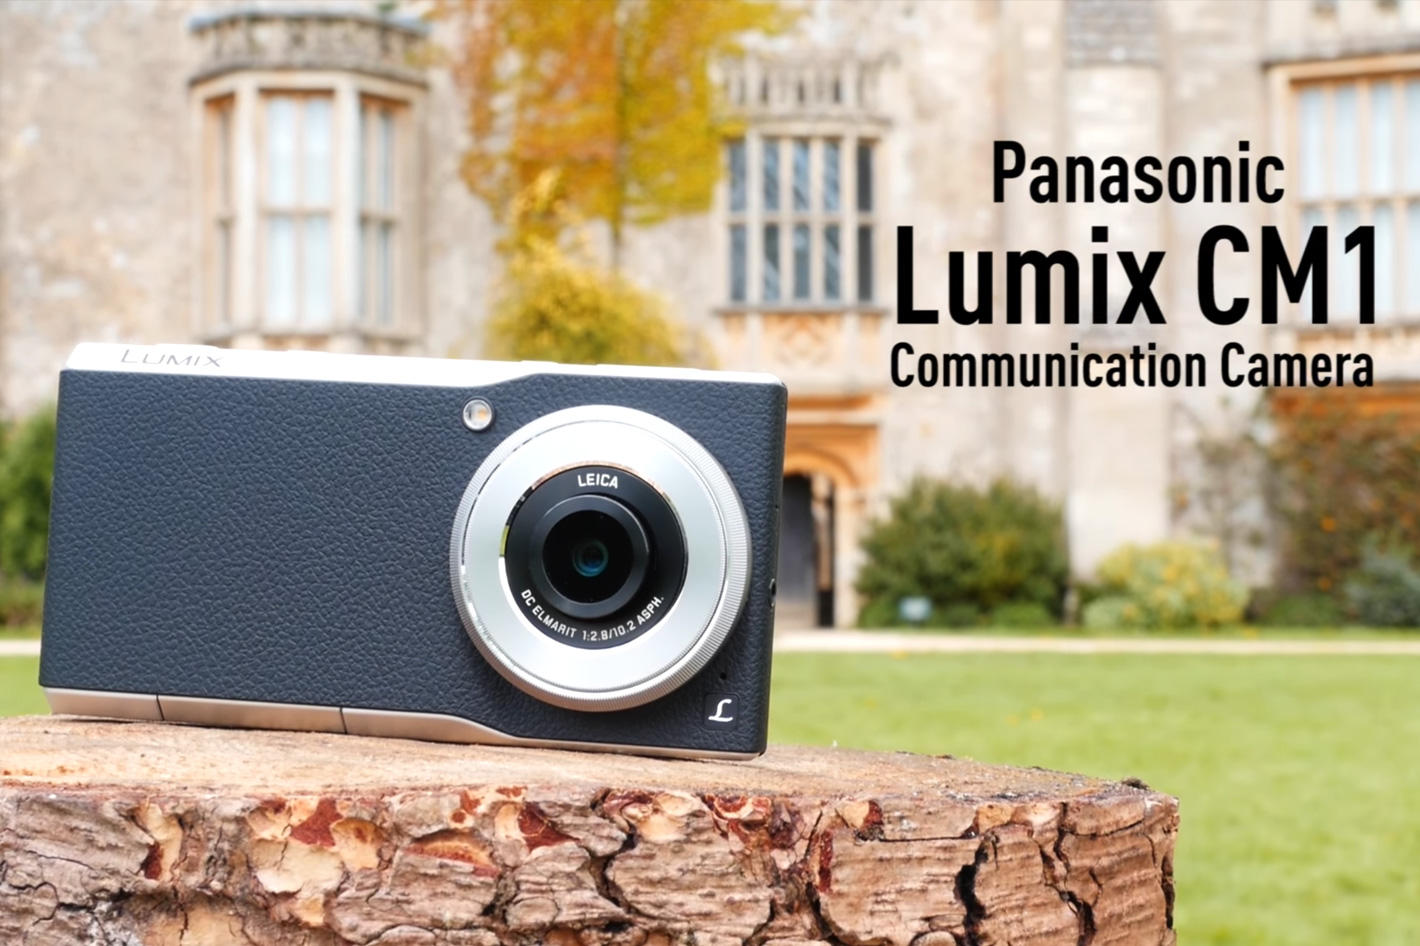 Is Panasonic going bring back the Lumix CM1 smartphone? by Jose - ProVideo Coalition